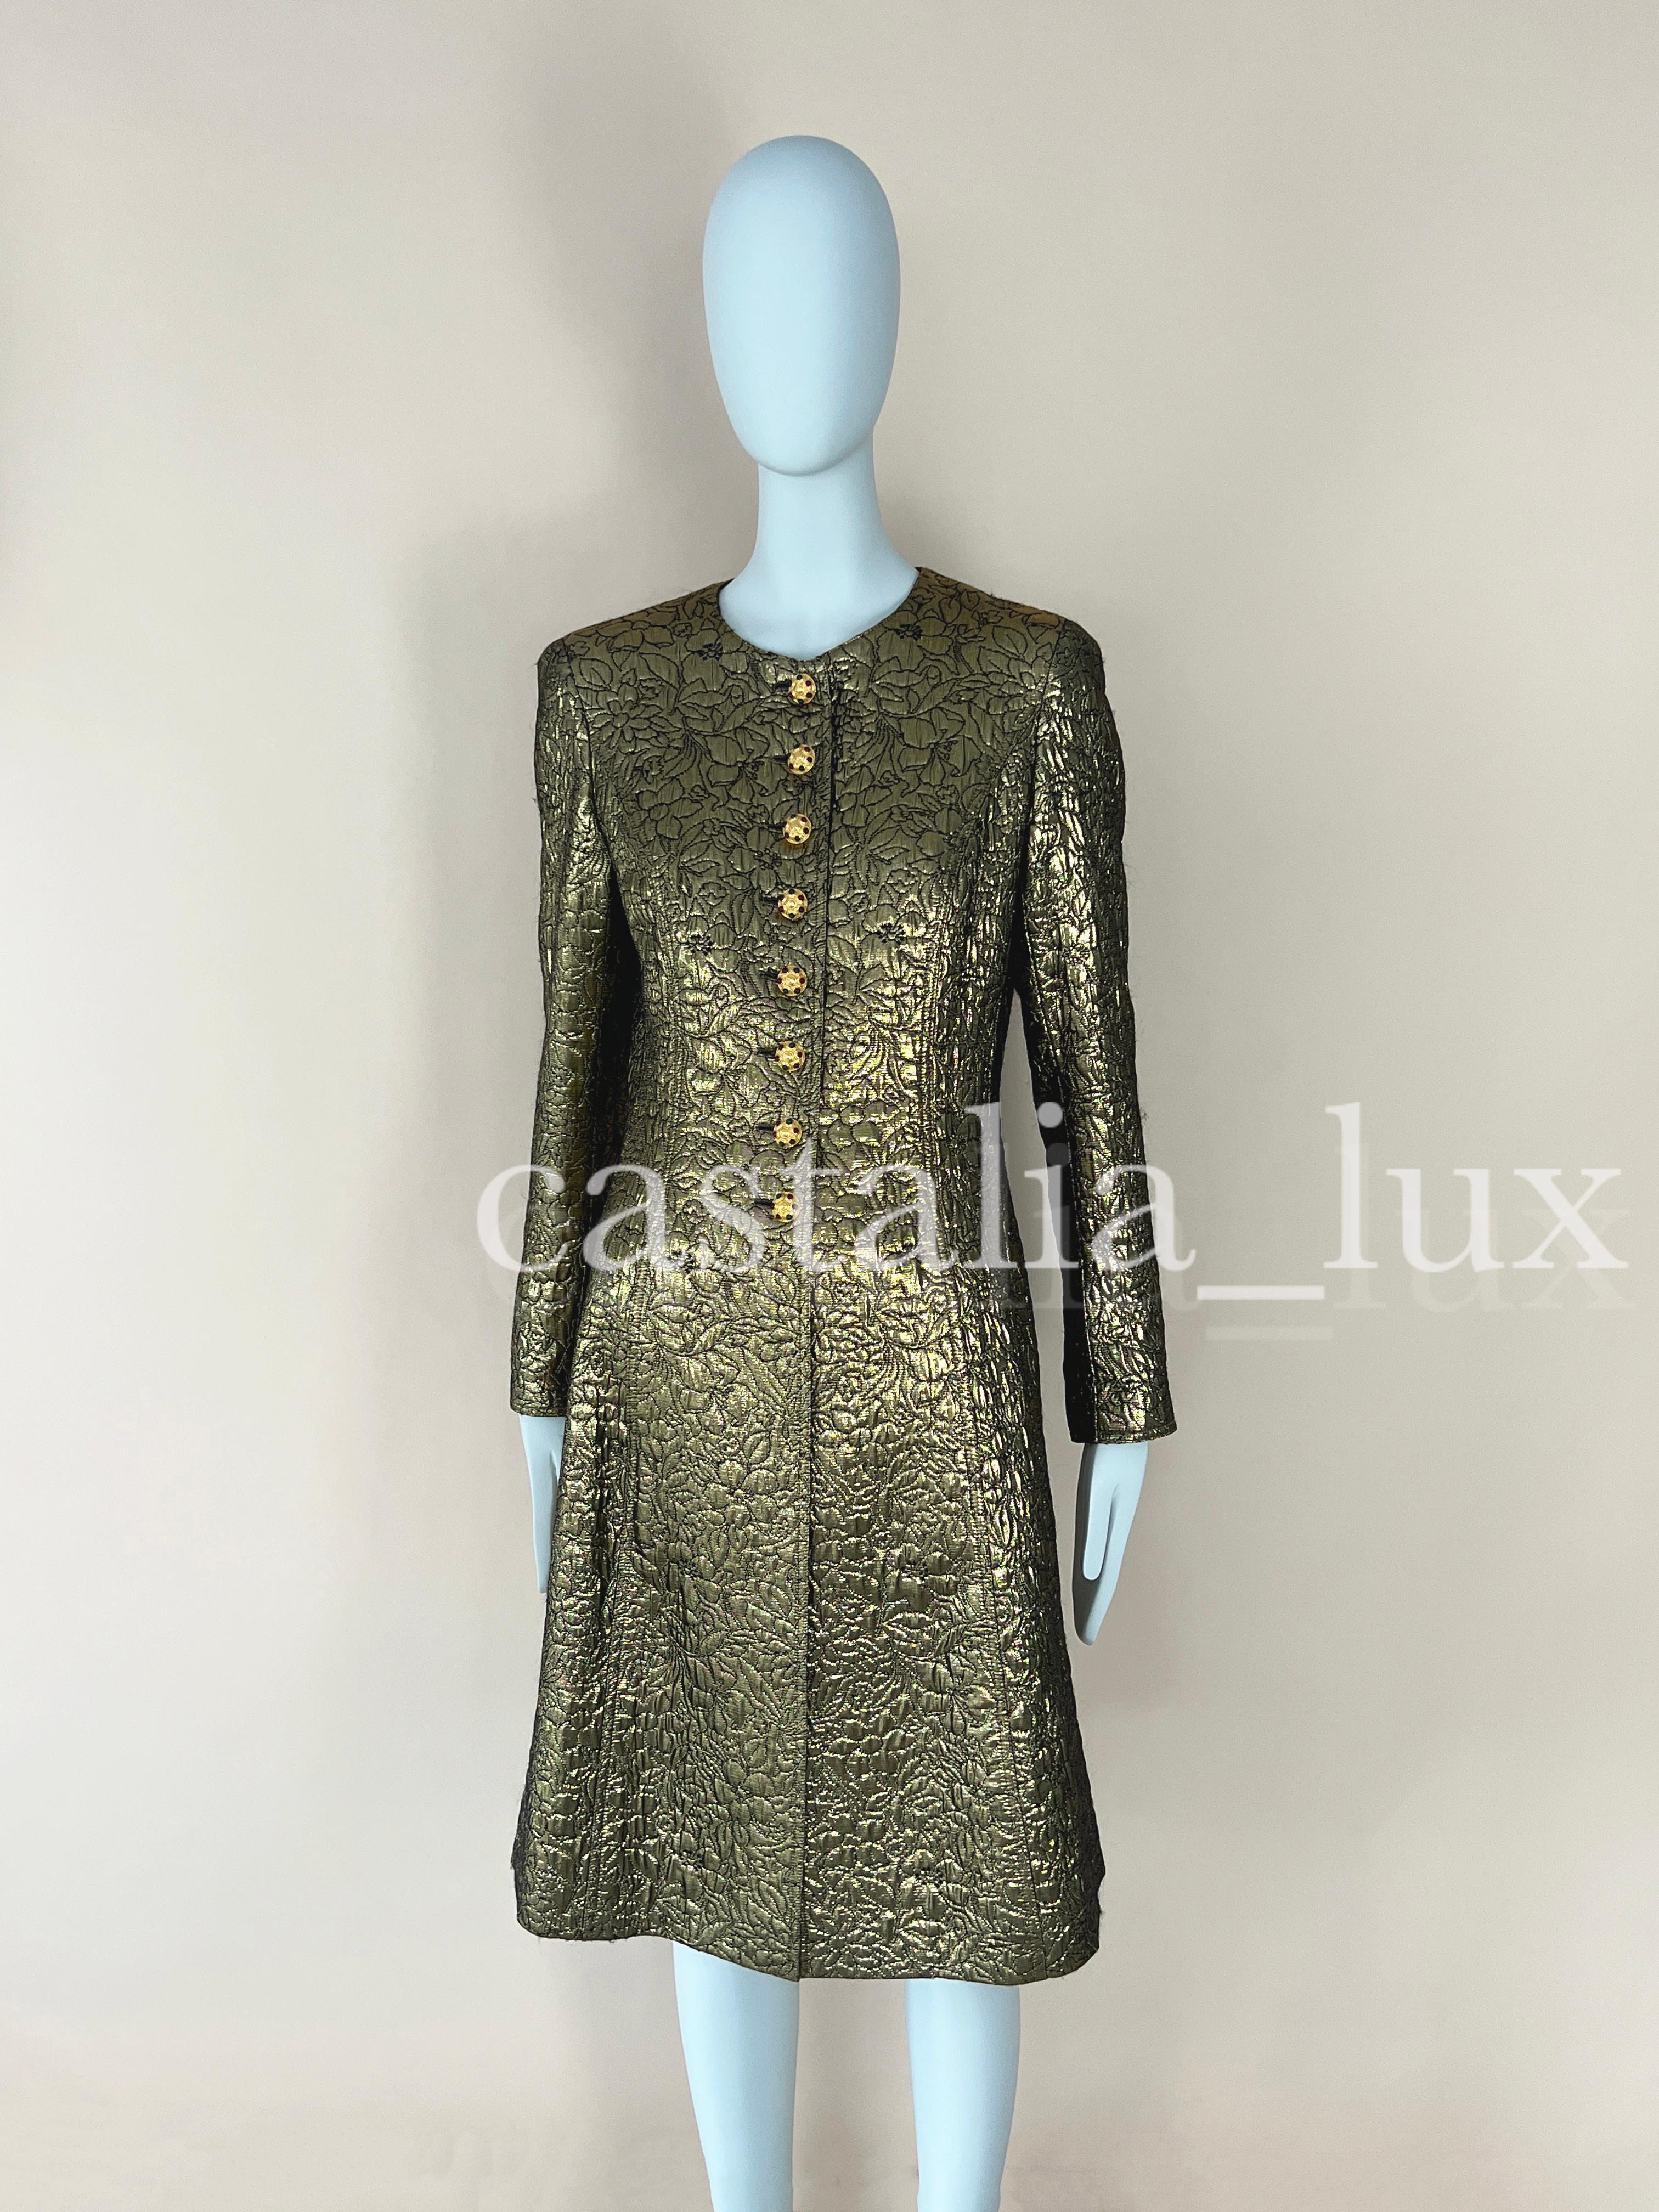 Chanel Museum Worth Jewel Buttons Brocade Jacket  For Sale 10